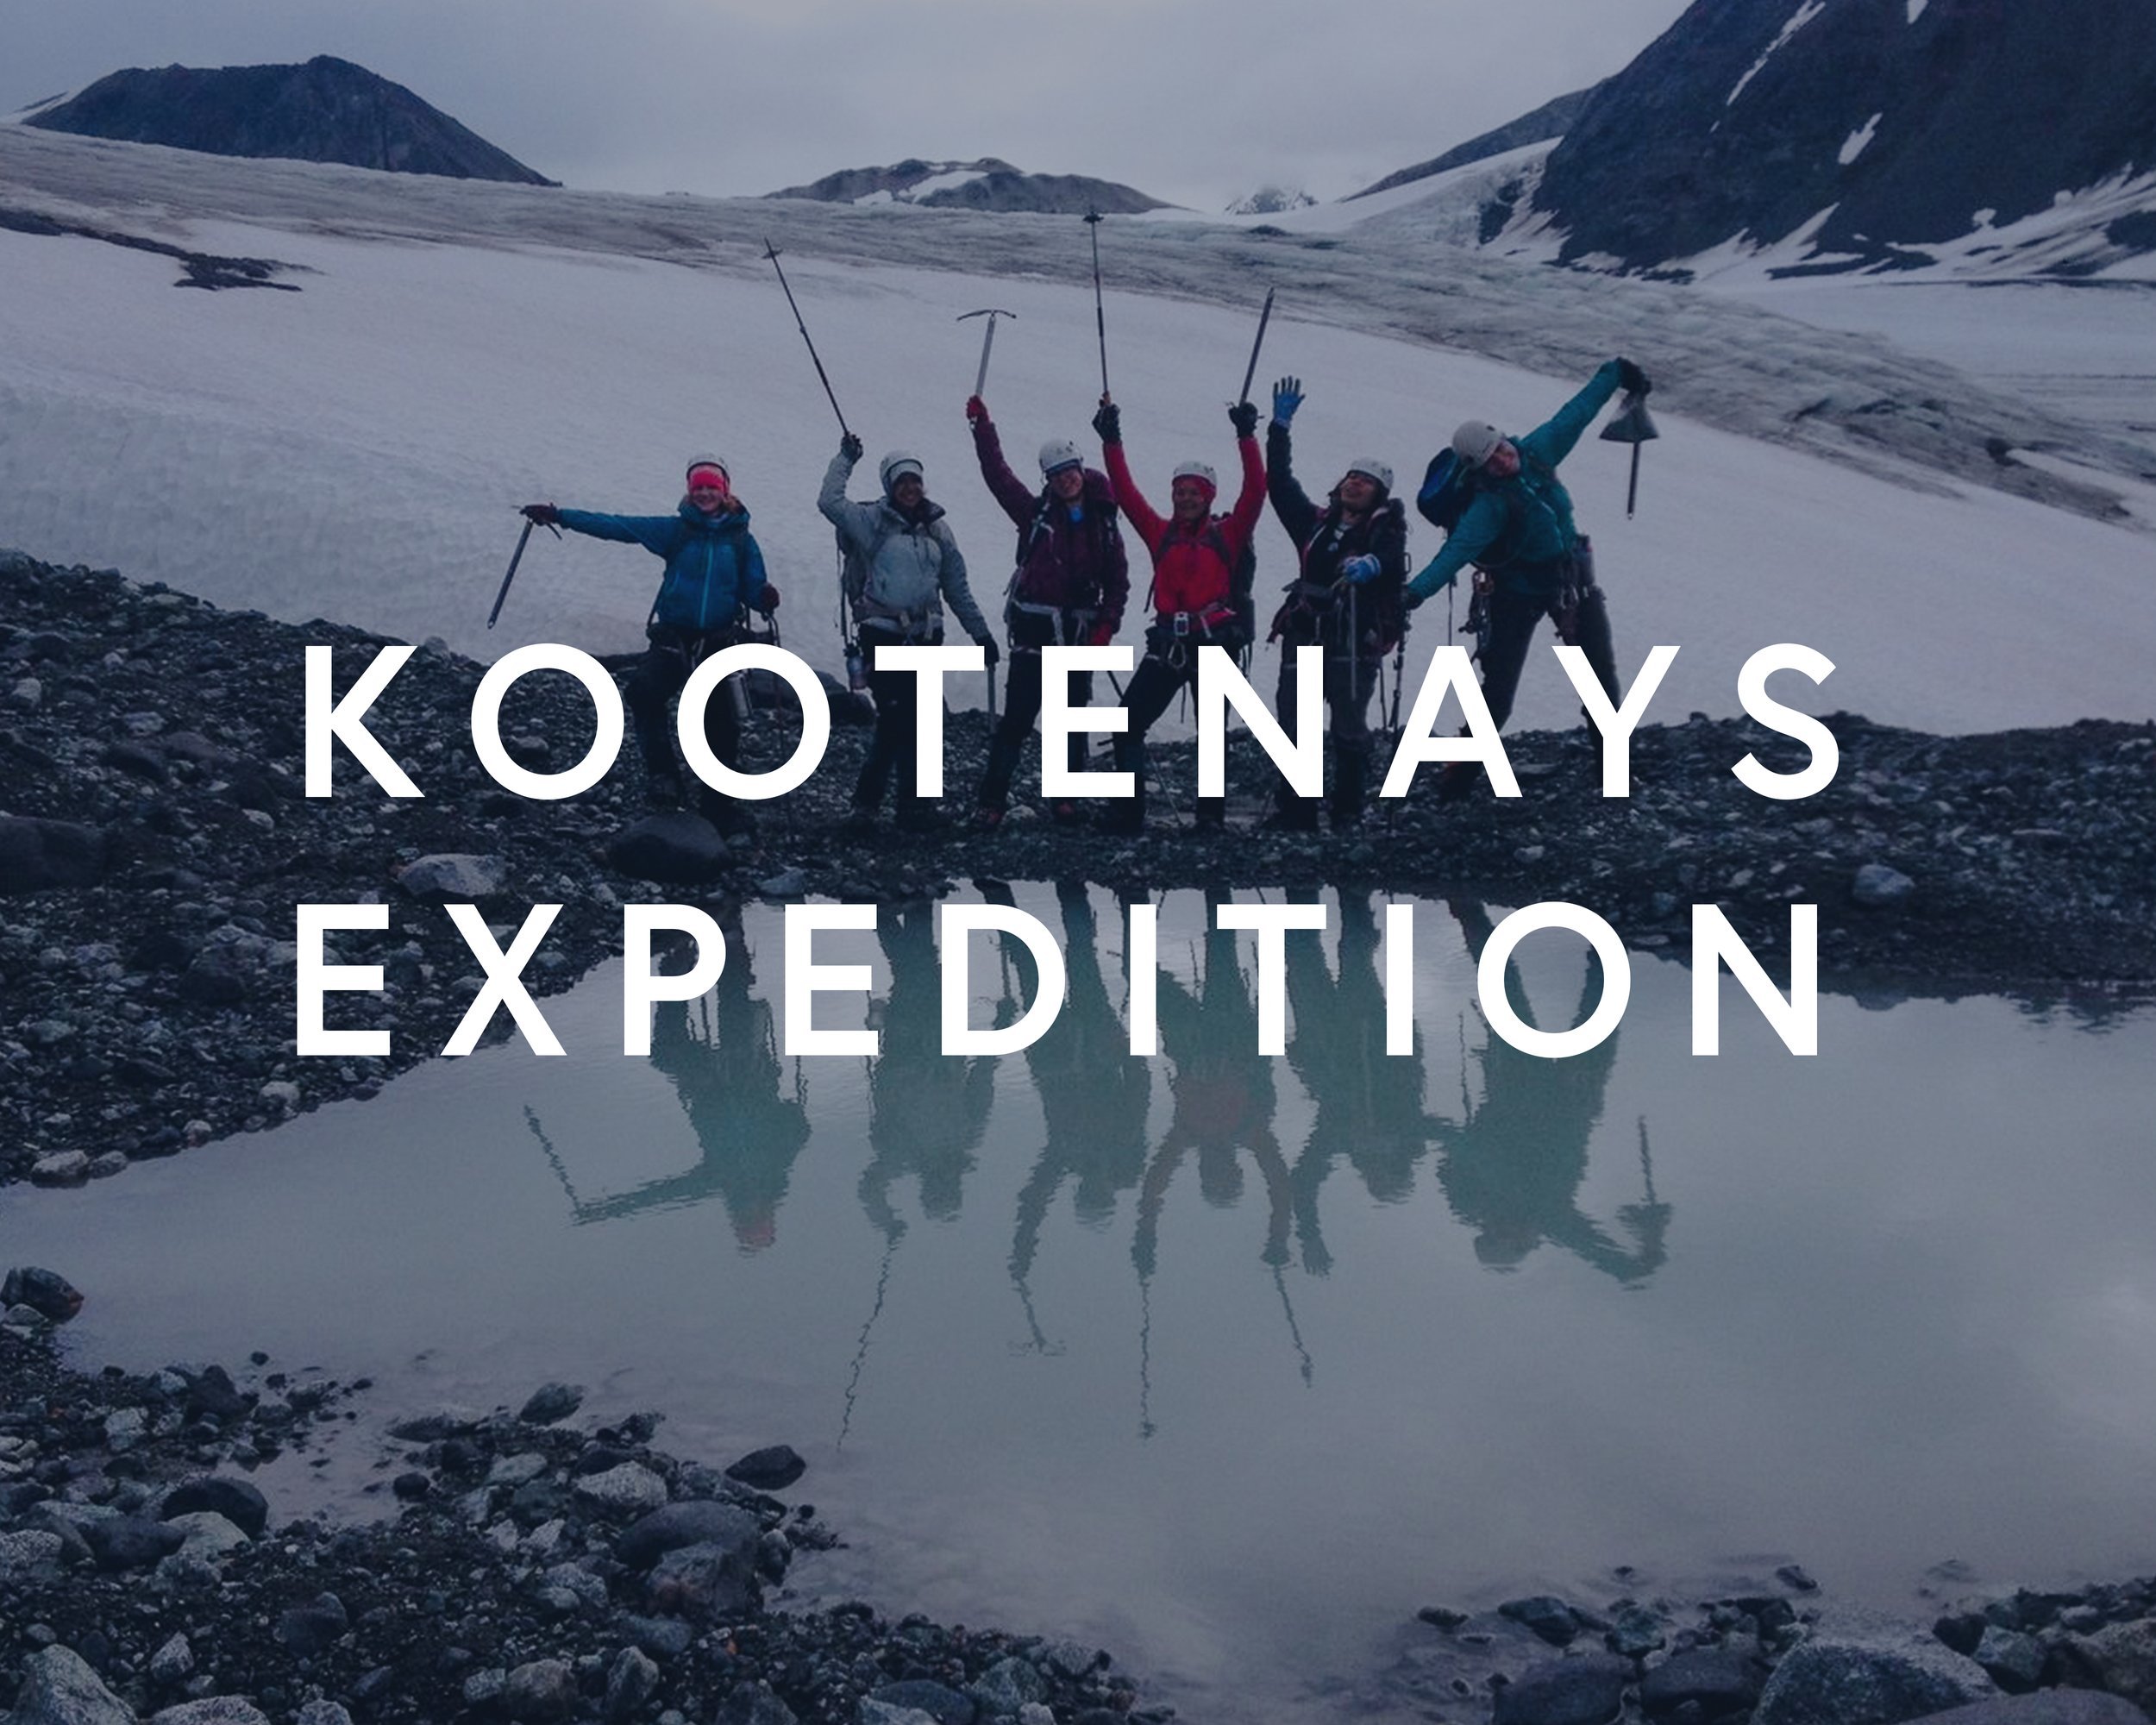 Image links to the Kootenays expedition information page